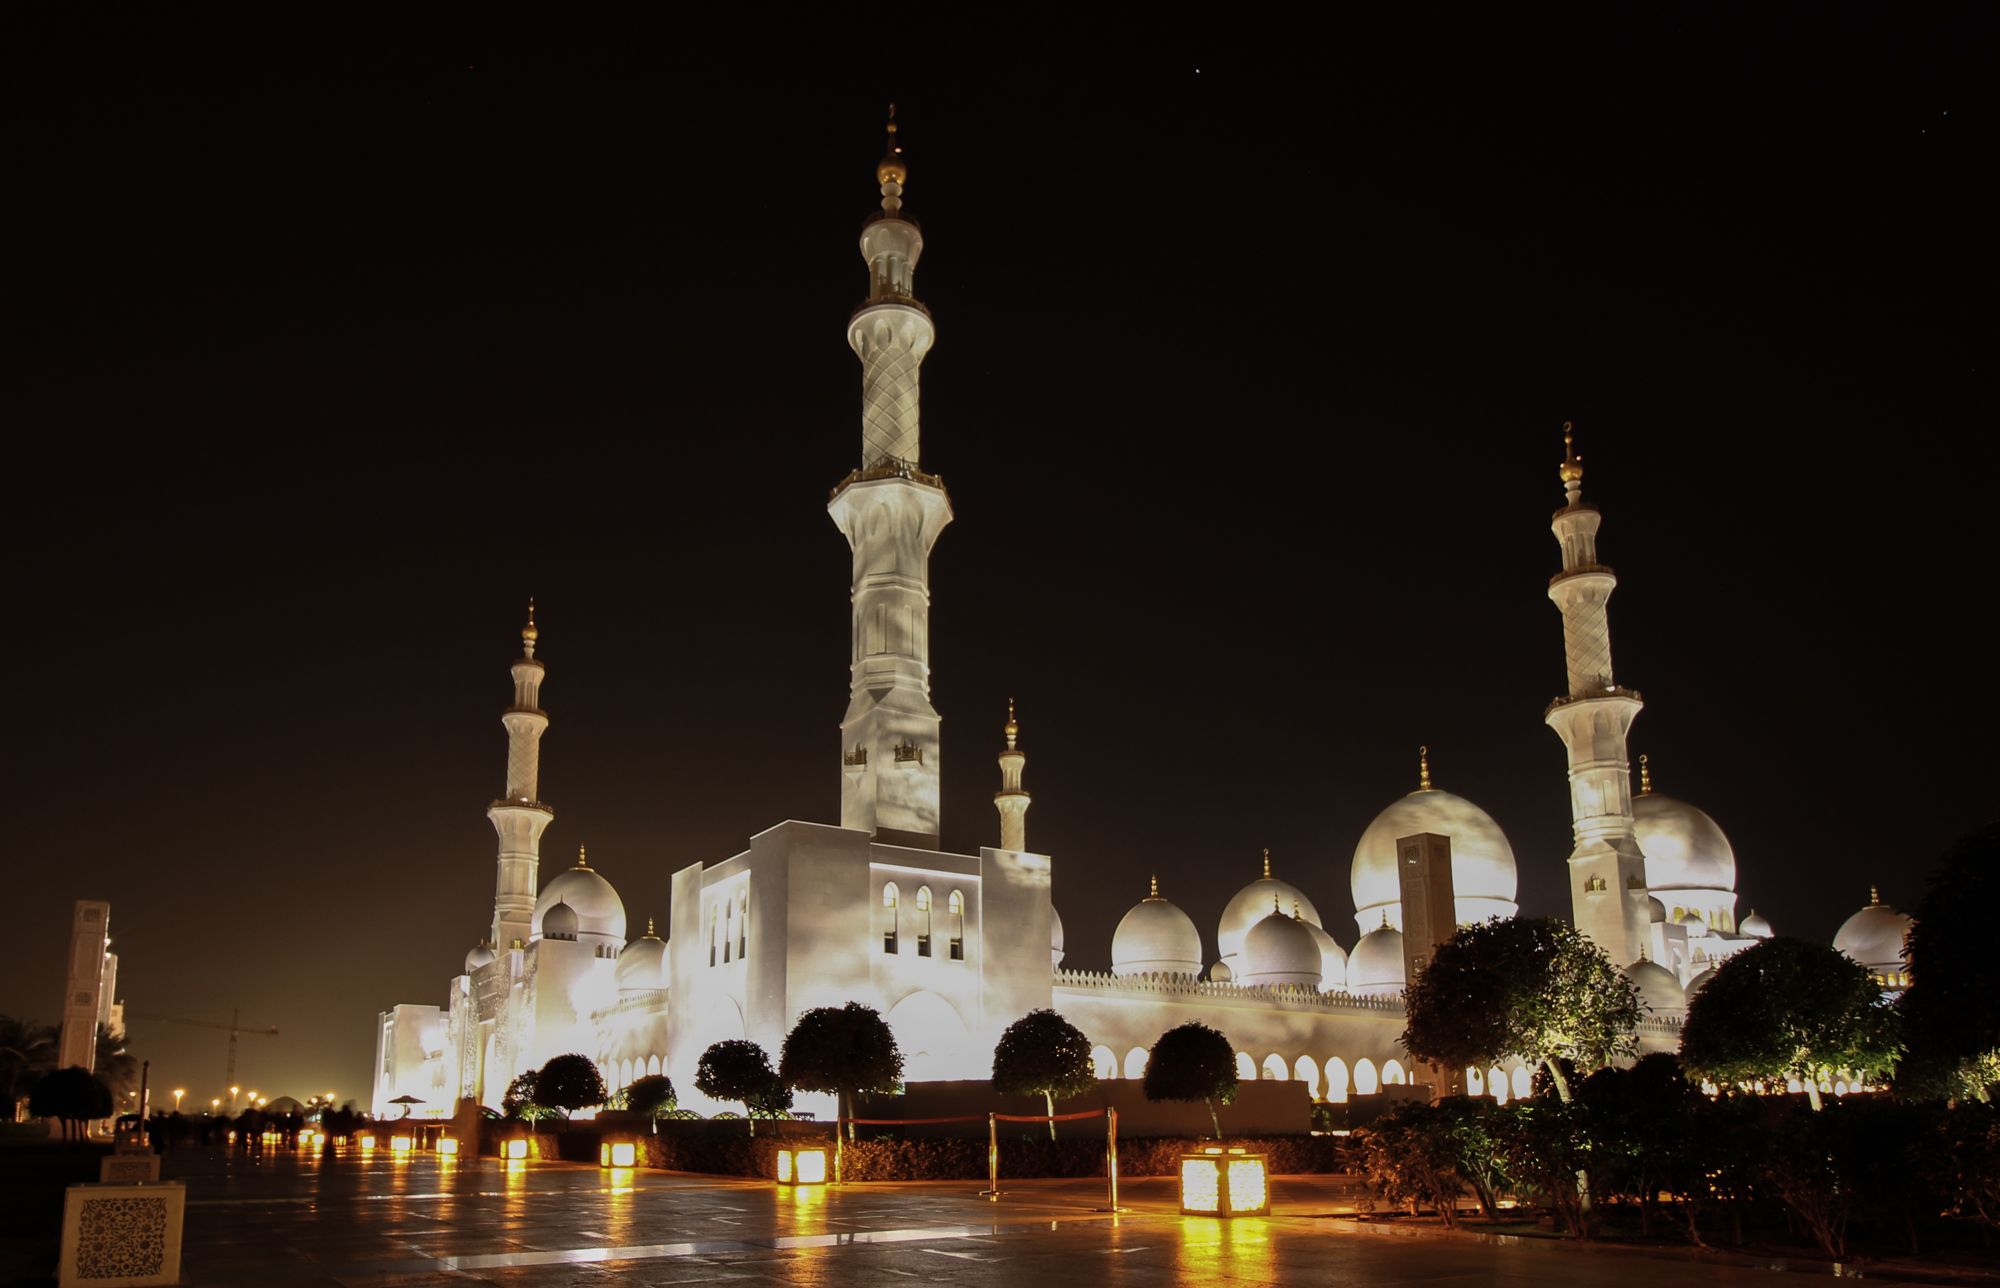 grand-mosque-from-far-at-night.jpg